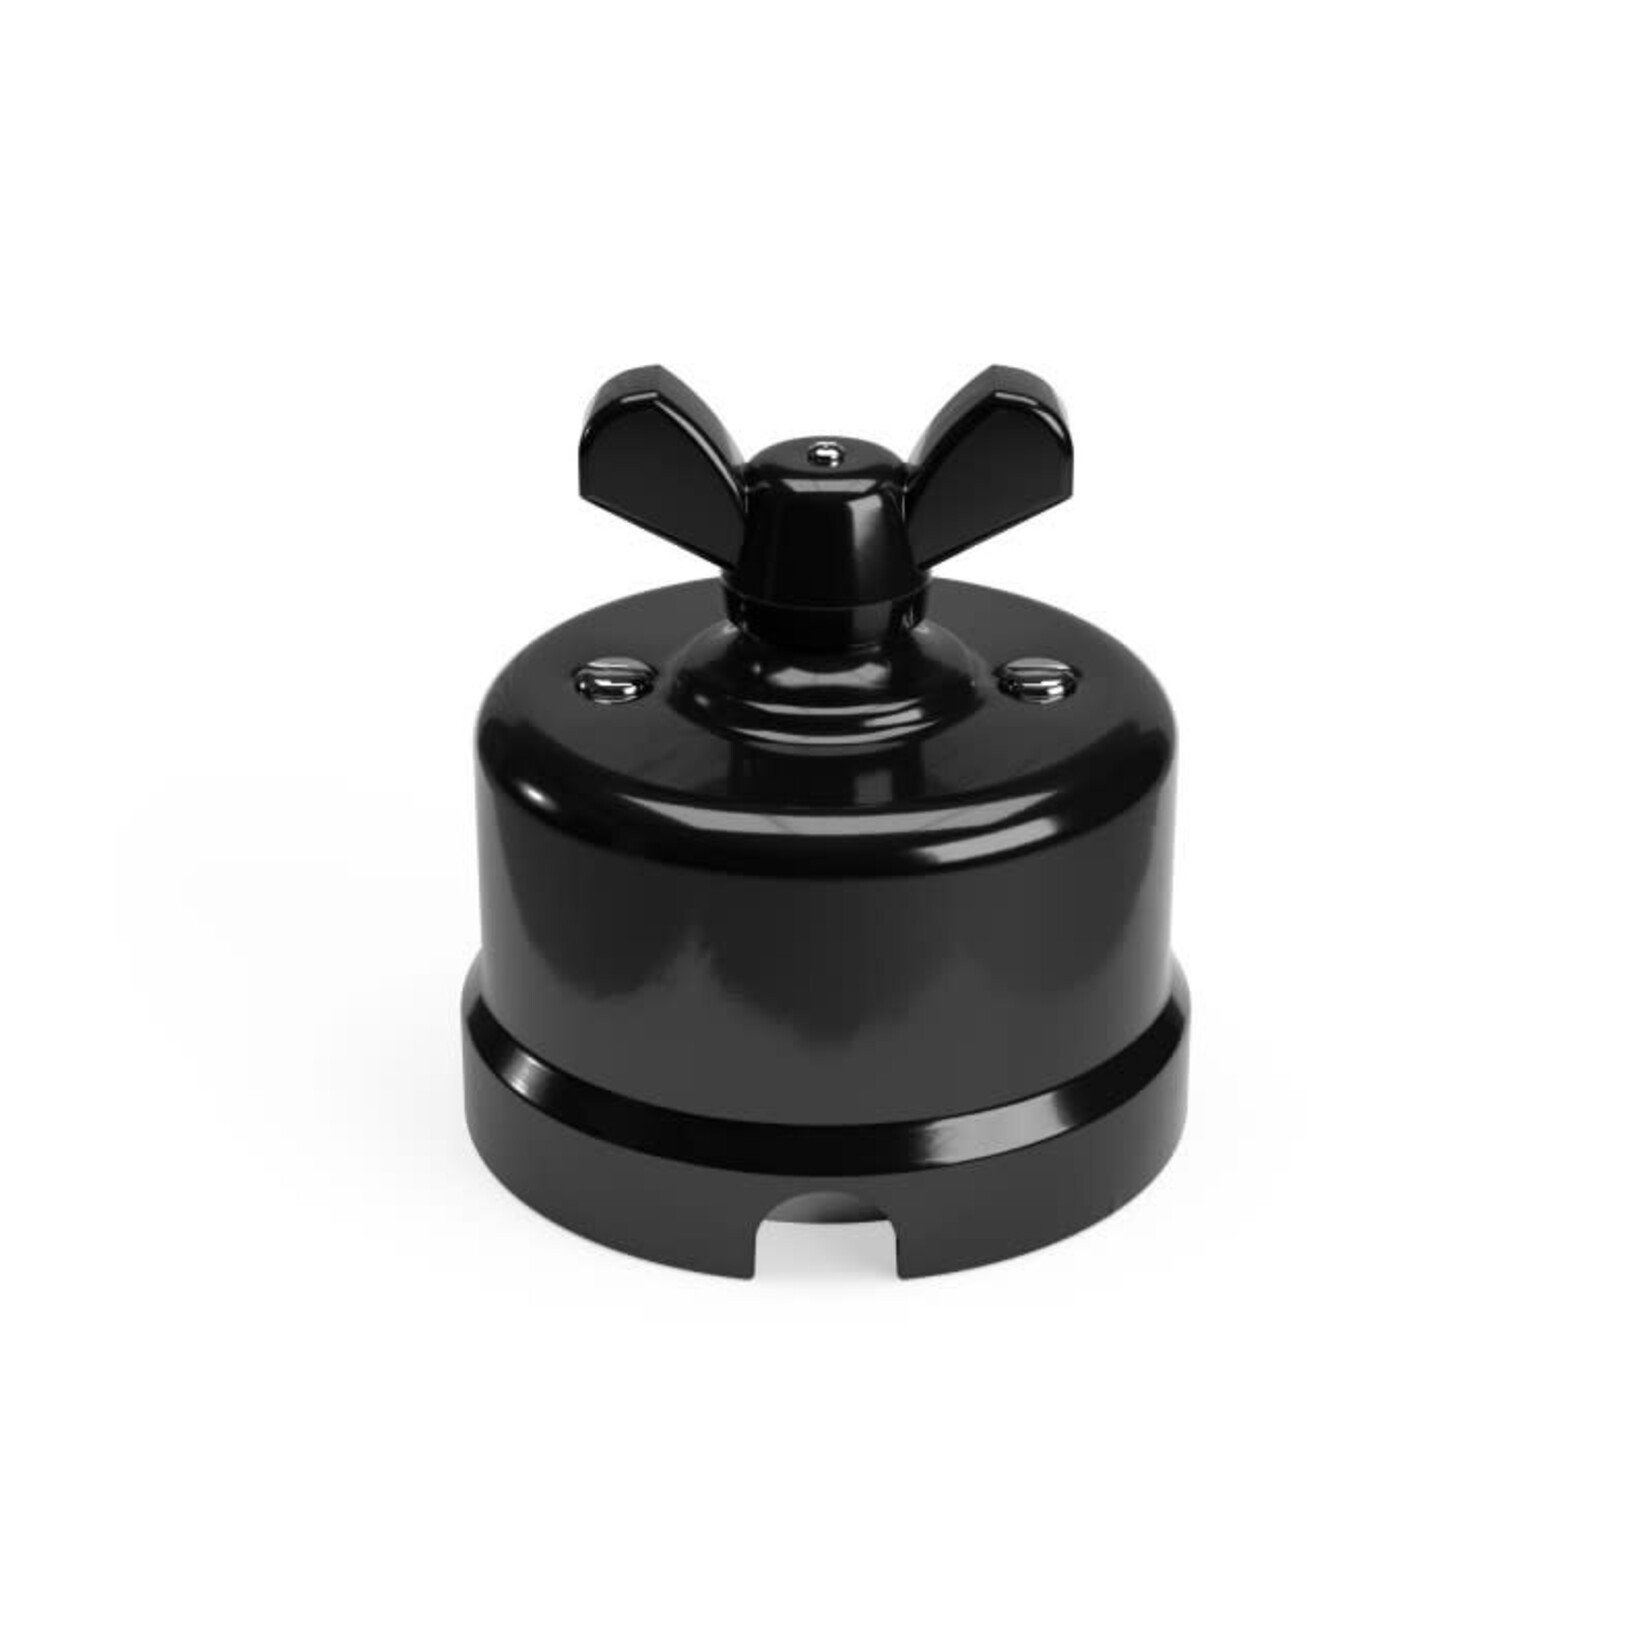 CCIT Switch/Diverter in black porcelain with BLACK butterfly nut